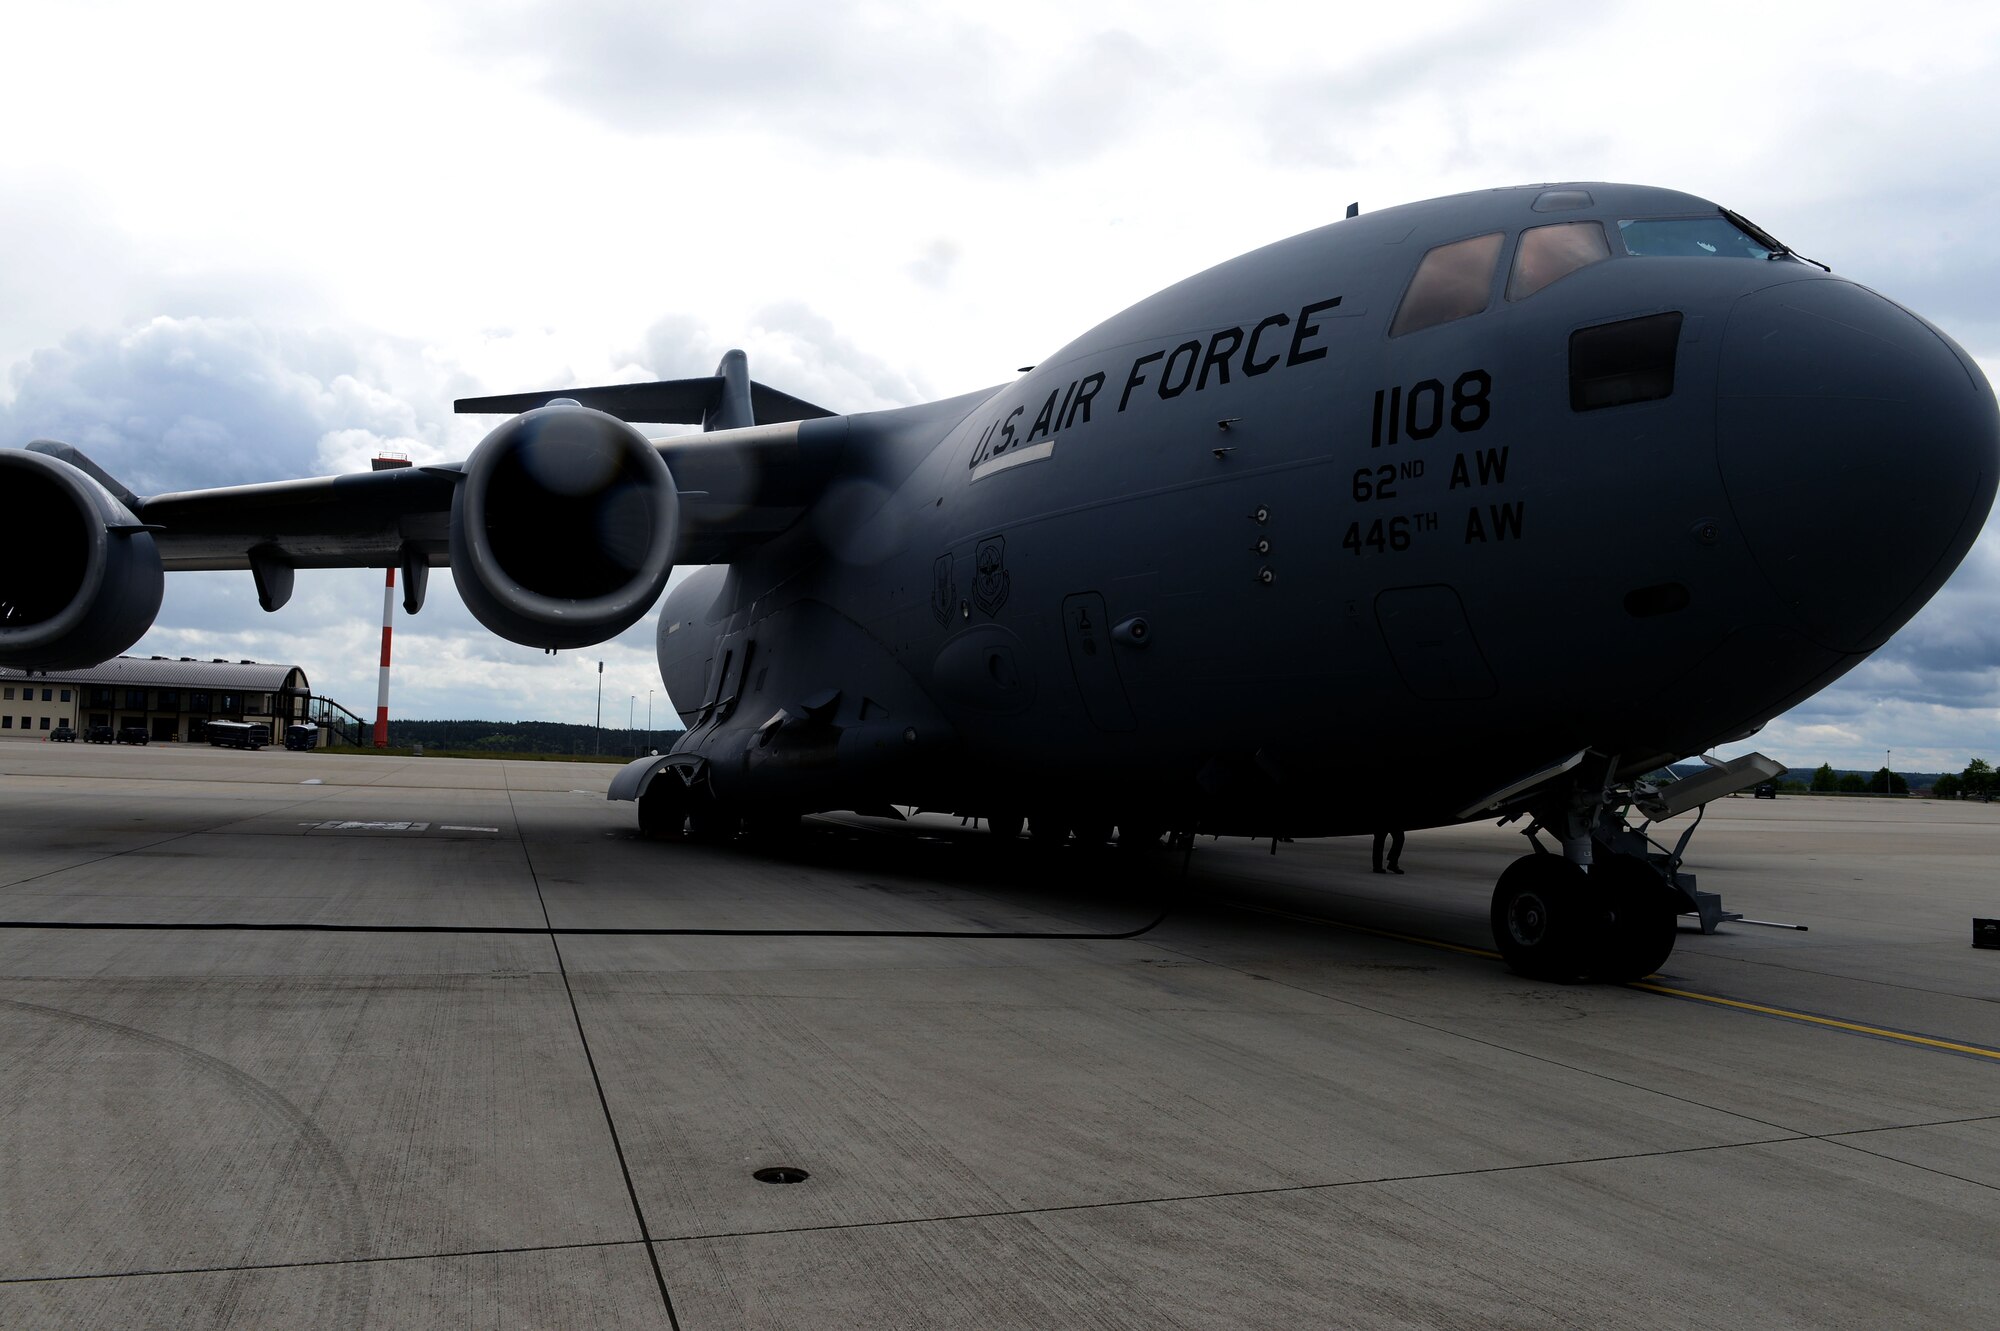 A U.S. Air Force C-17 Globemaster III Cargo Aircraft lands at Spangdahlem Air Base, Germany, May 7, 2014 en route to a downrange location. The C-17 is capable of rapid strategic delivery of troops and all types of cargo to main operating bases or directly to forward bases in the deployment area. (U.S. Air Force photo by Senior Airman Alexis Siekert/Released)